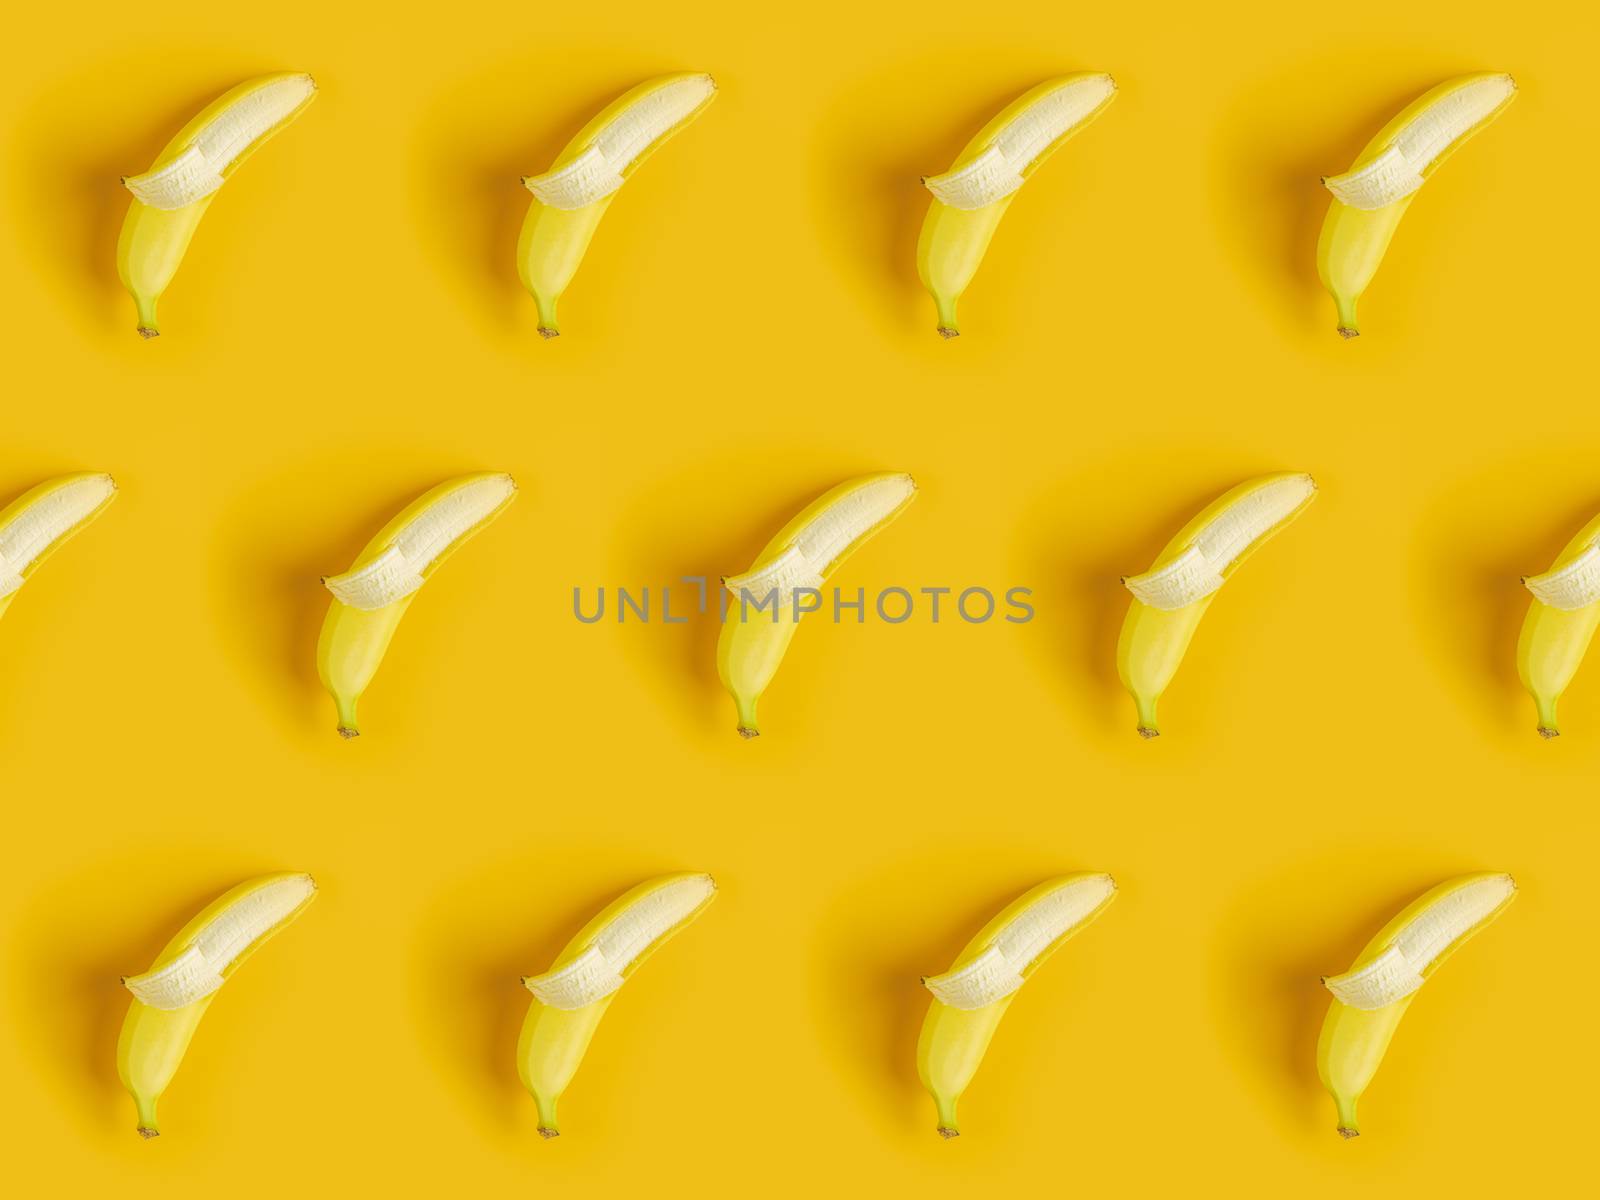 Tropical abstract background. Juicy ripe banana pattern on yellow background top. Seamless pattern with bananas.	